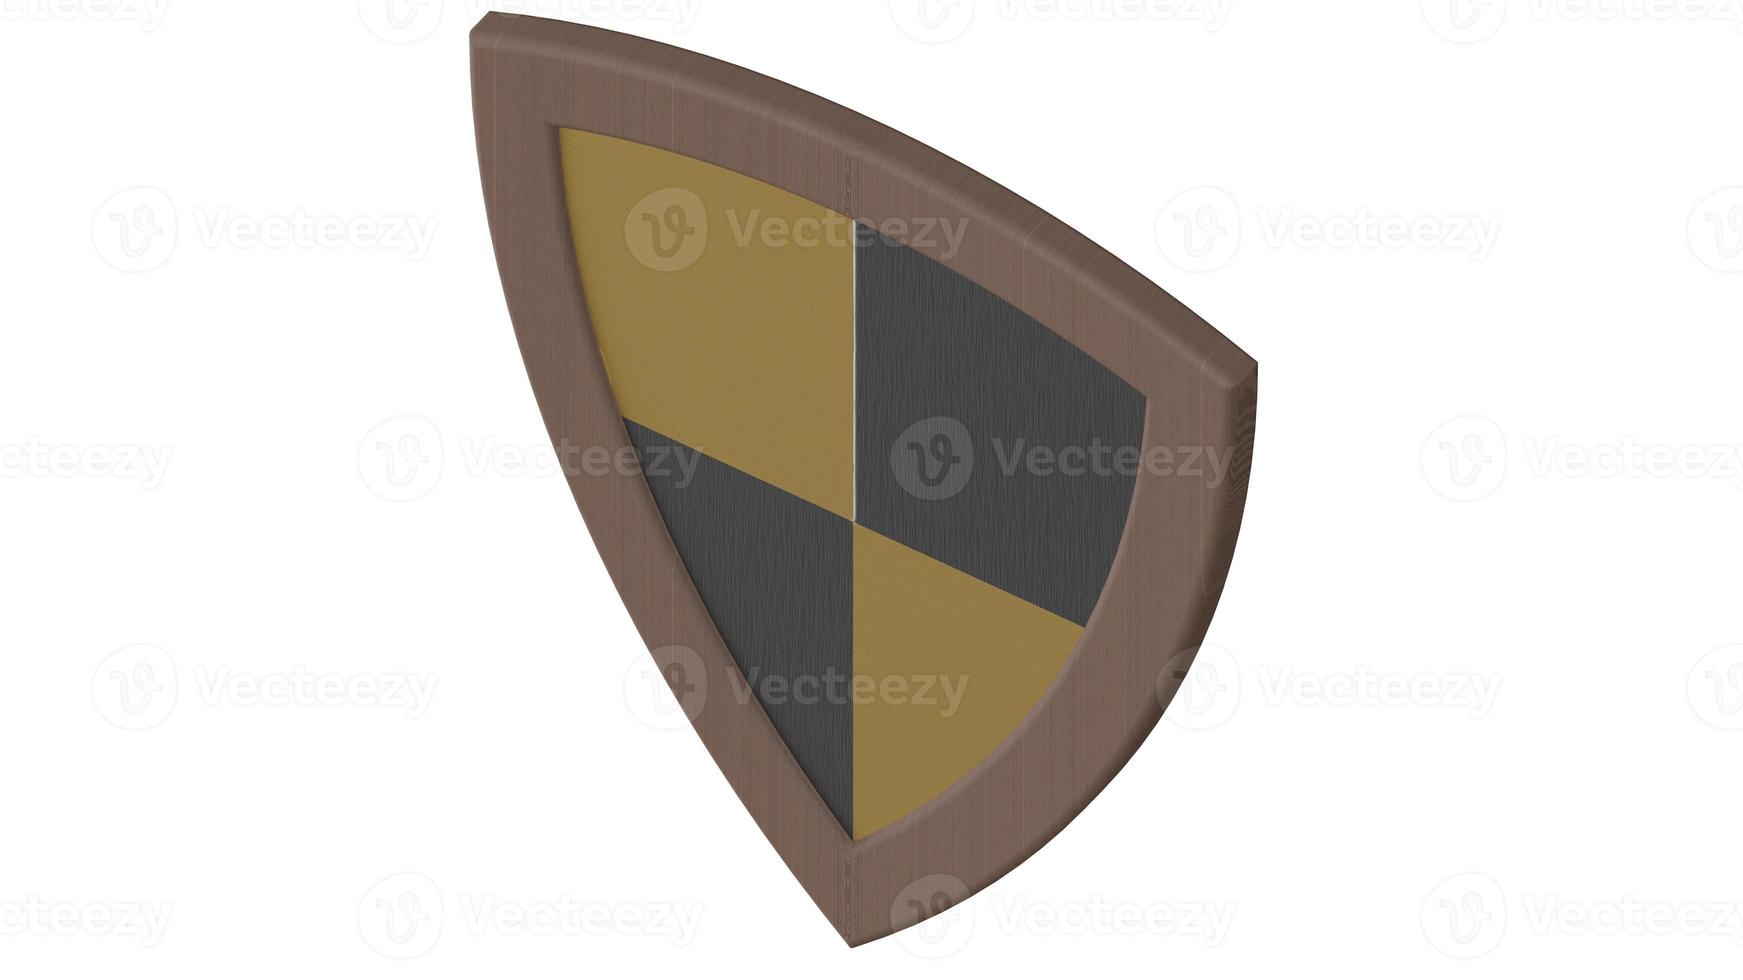 wood yellow and black stripes shield medieval 3d illustration render photo